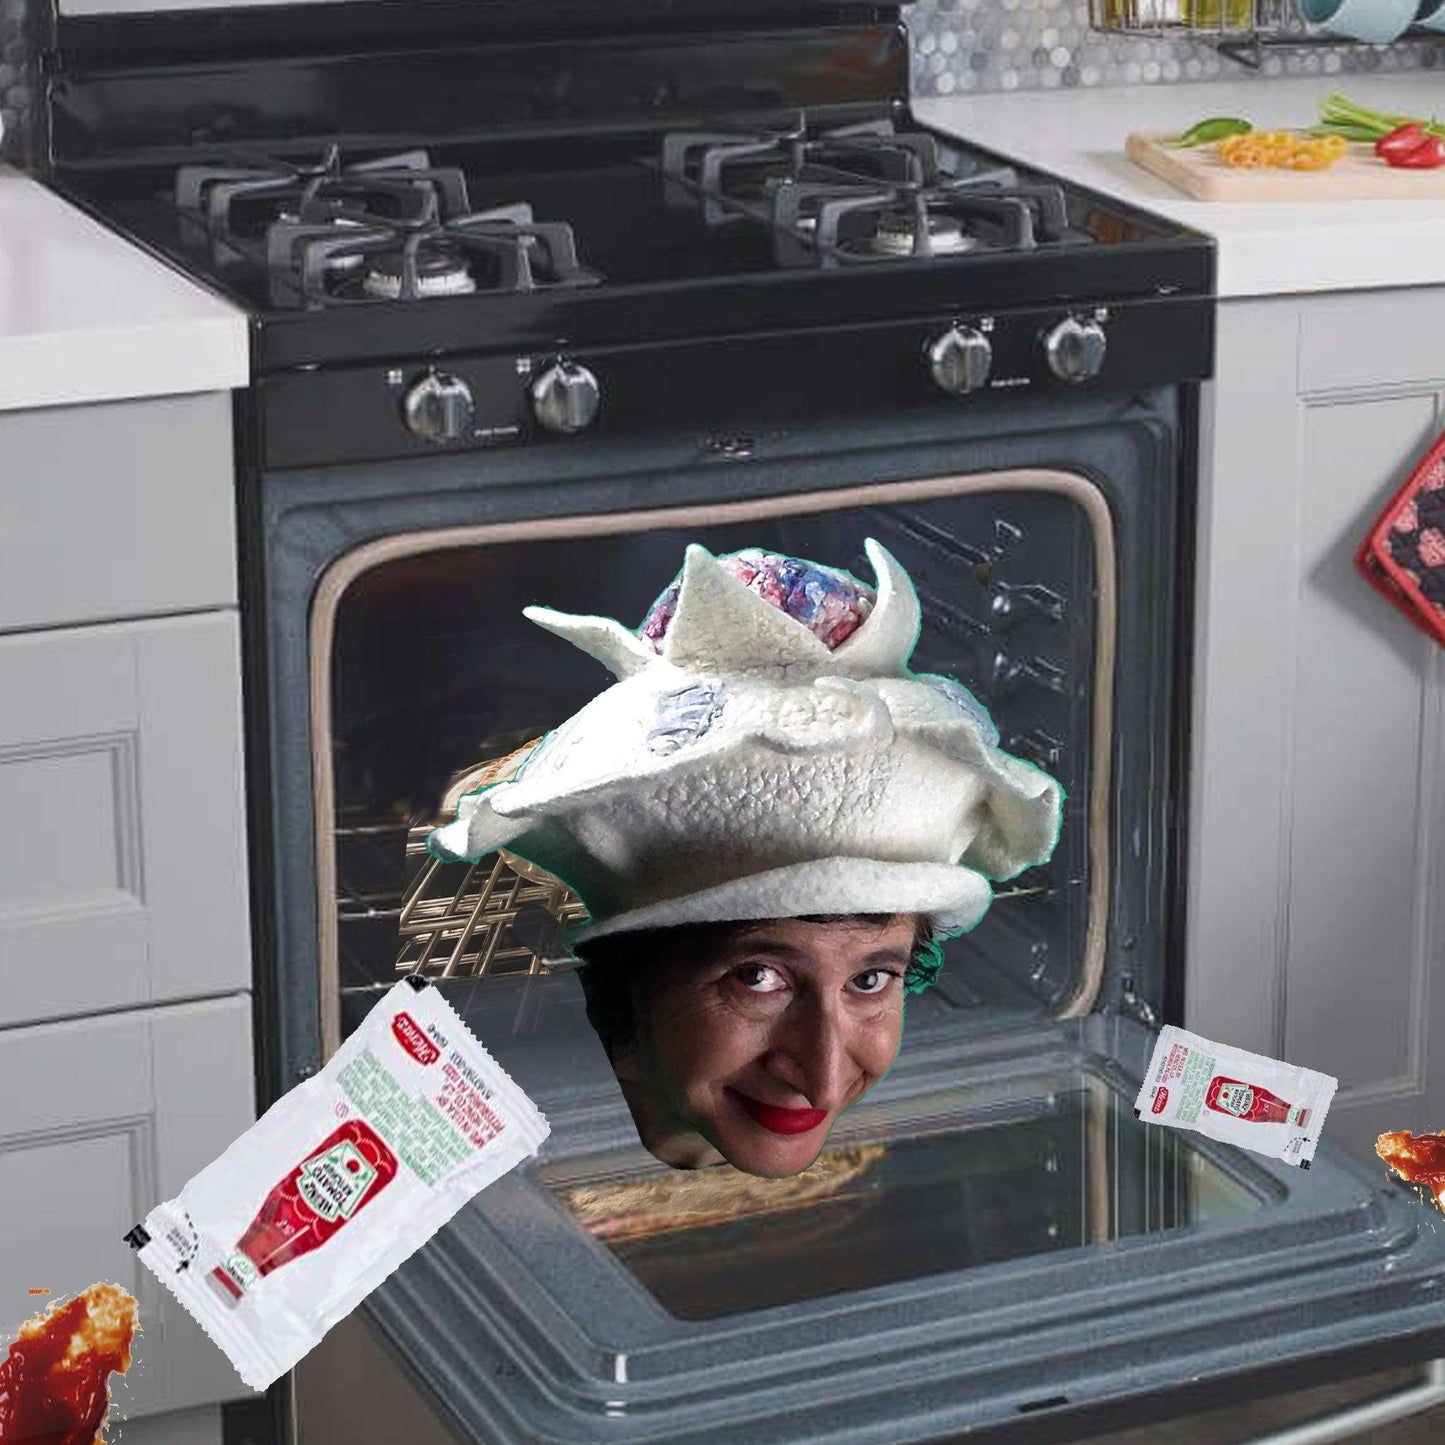 Surreal Collage featuring the Brain Hat popping out of an Oven with two Heinze Ketchup packages - for a Halloween collage.